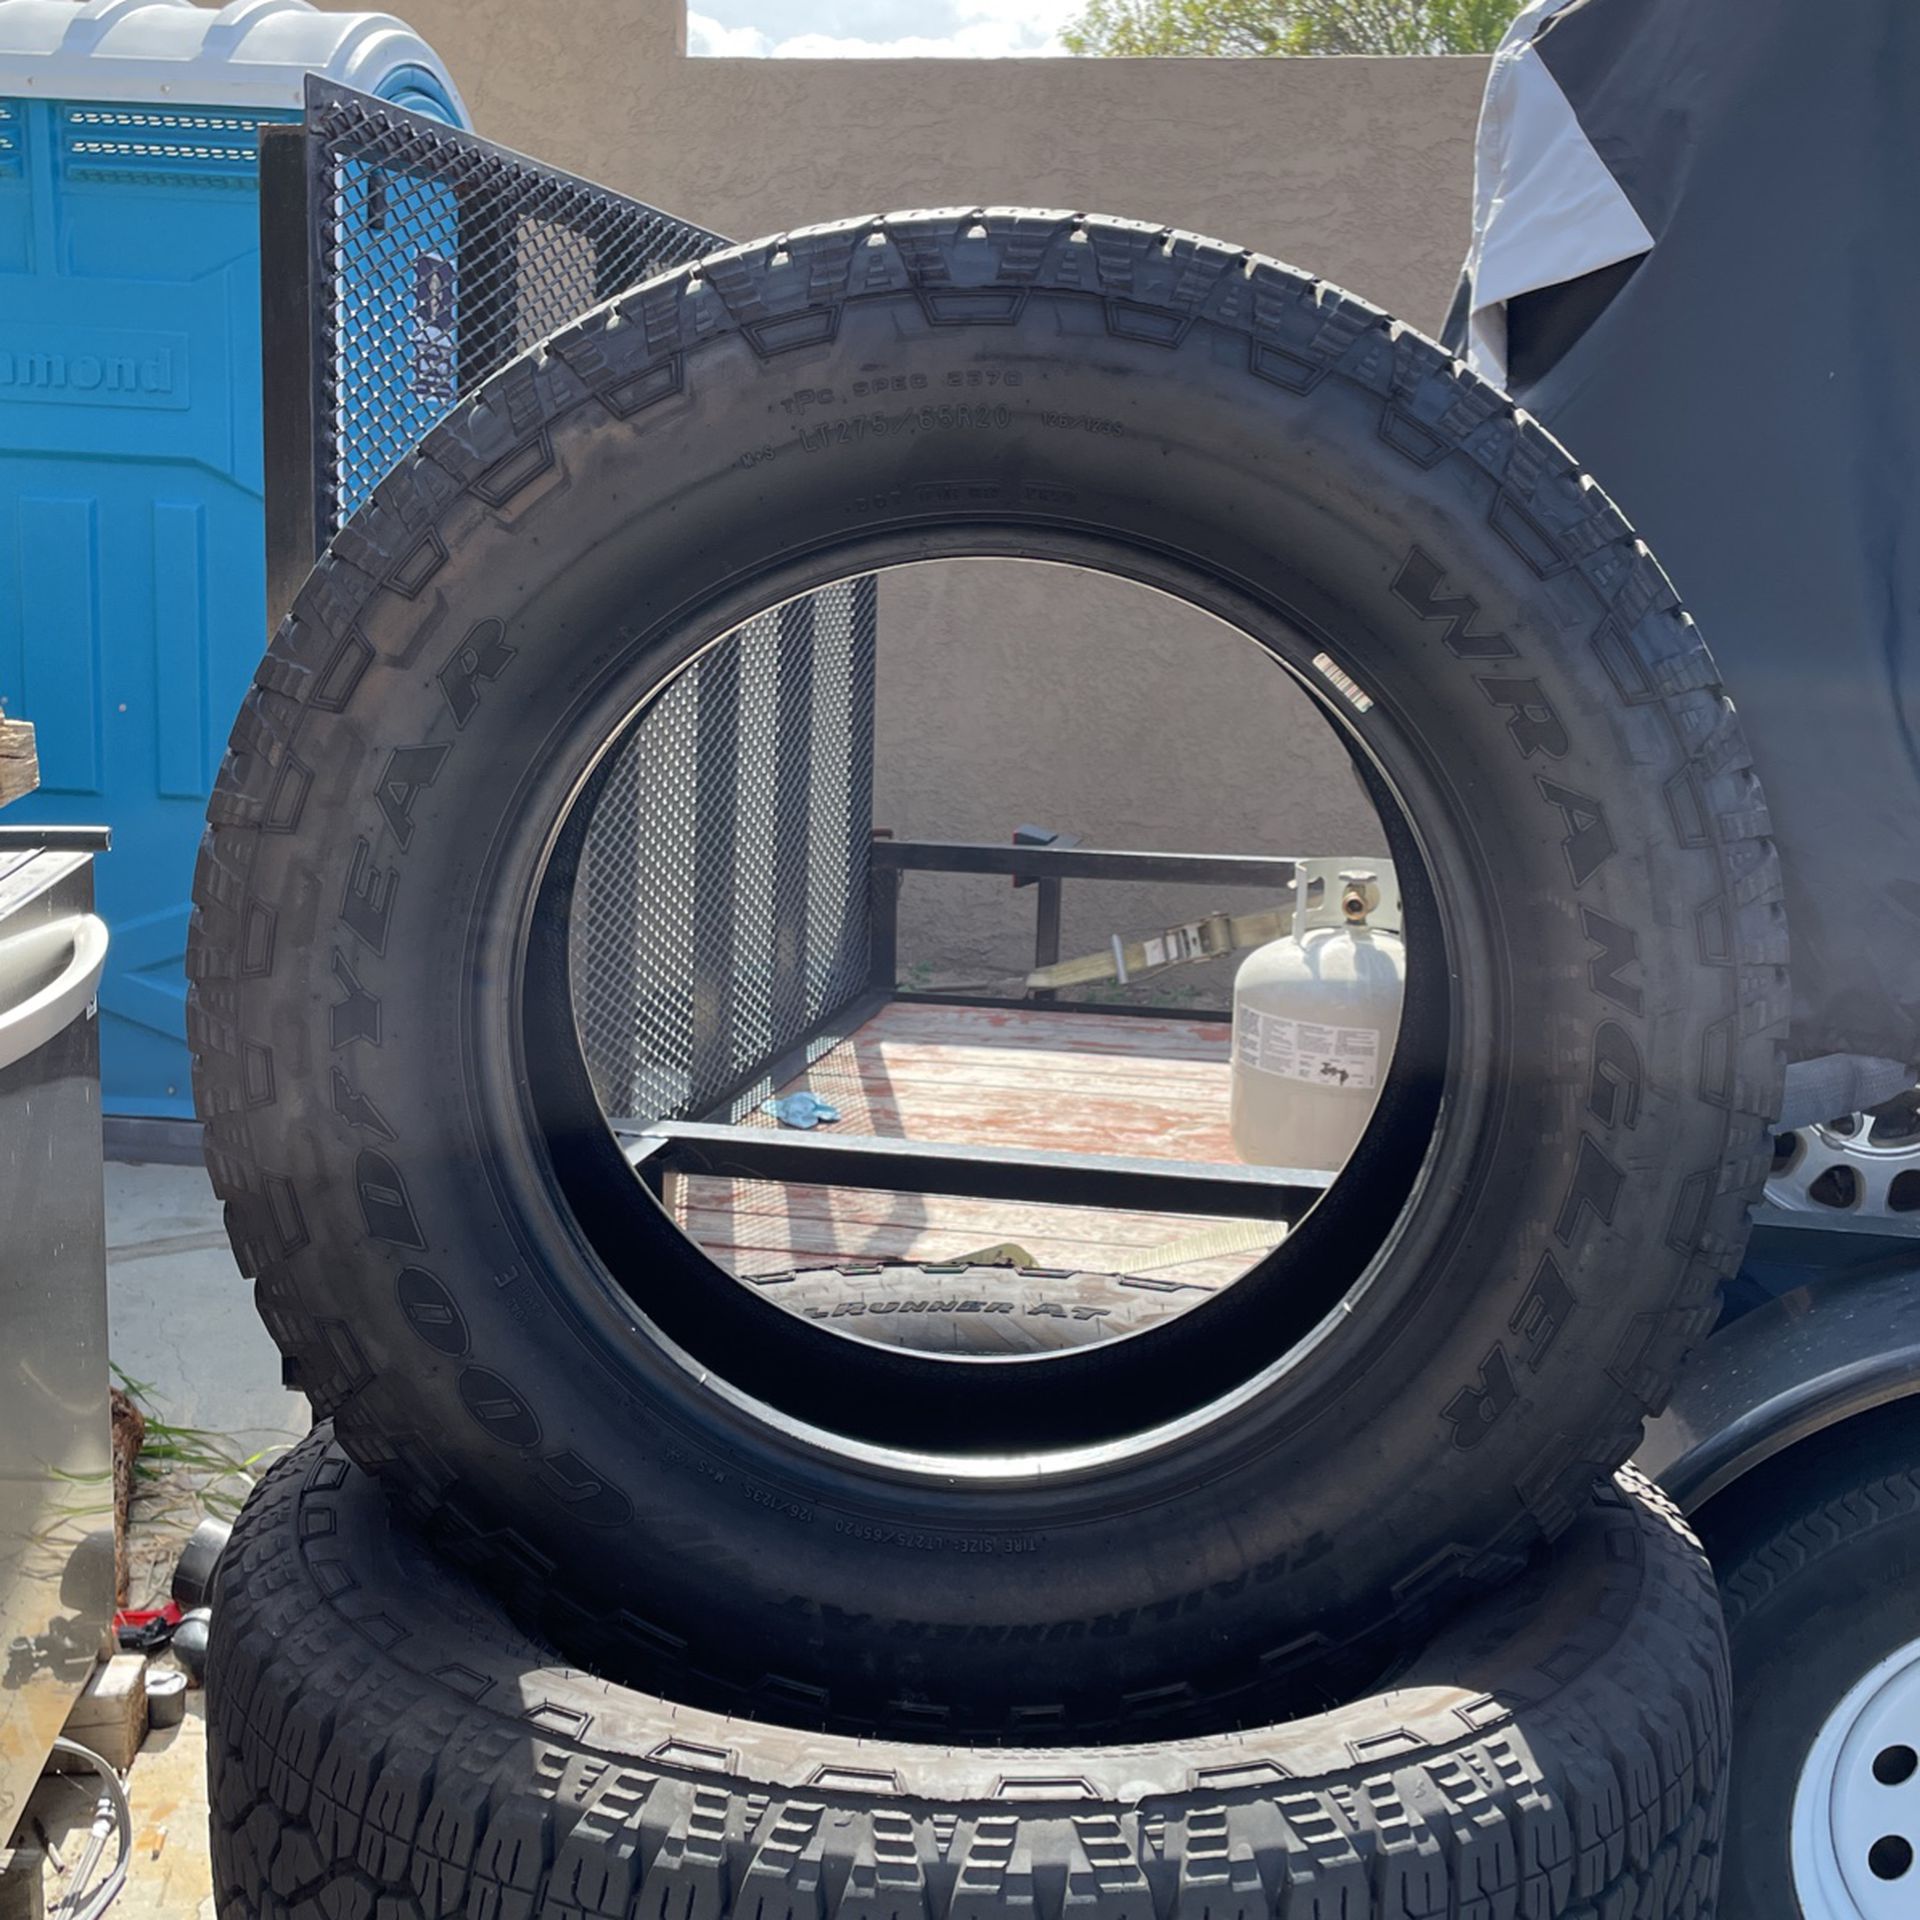 Goodyear Wrangler Trail Runner Tires 275/65r20 for Sale in Chula Vista, CA  - OfferUp